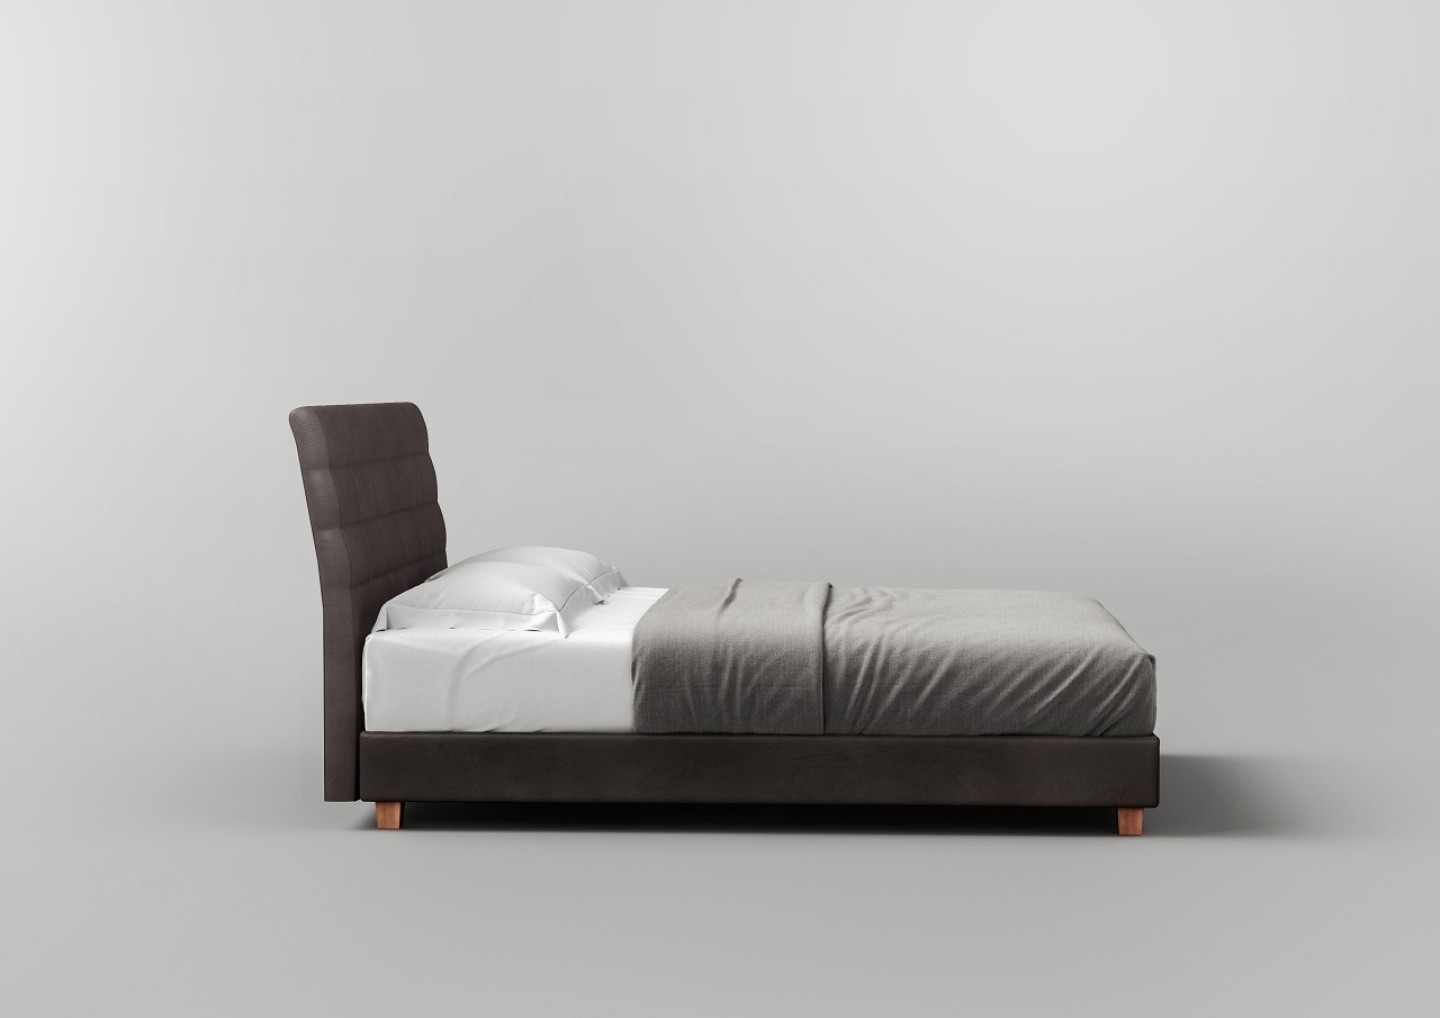 THE STUNNING BED by Elite Strom